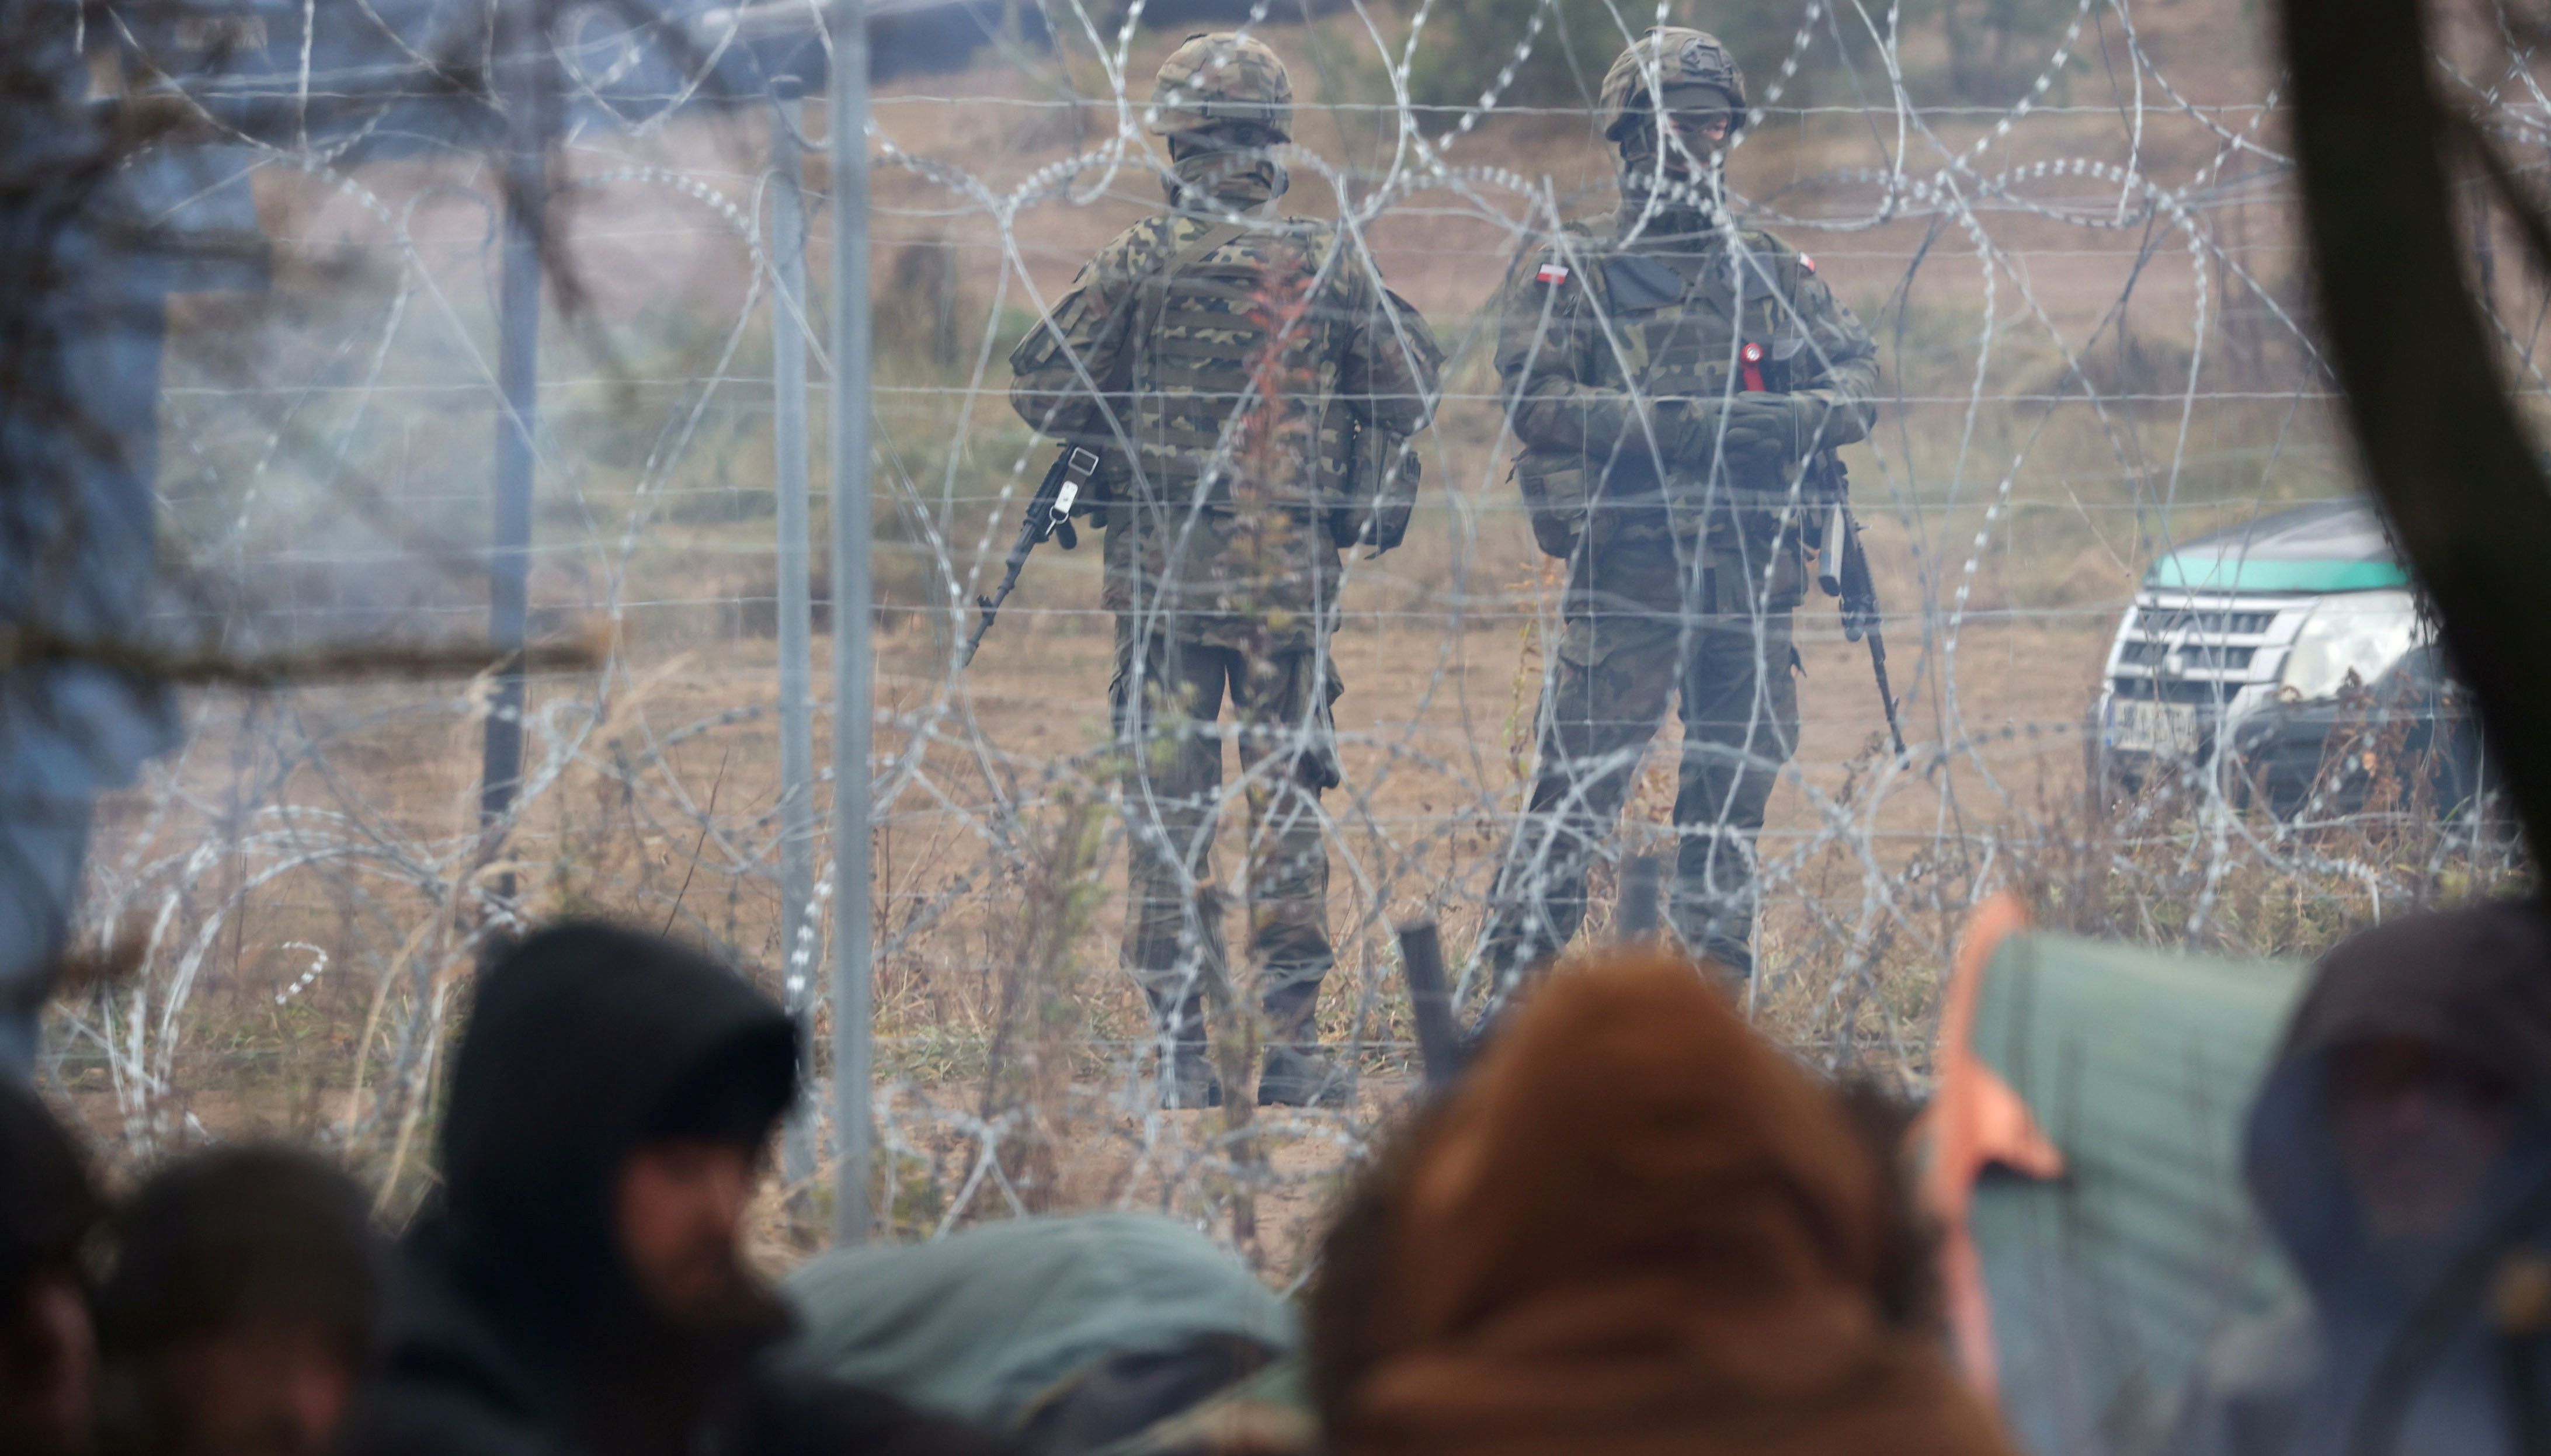 Polish service members are seen through a barbed wire fence as hundreds of migrants gather on the Belarusian-Polish border in an attempt to cross it in the Grodno region, Belarus November 10, 2021.